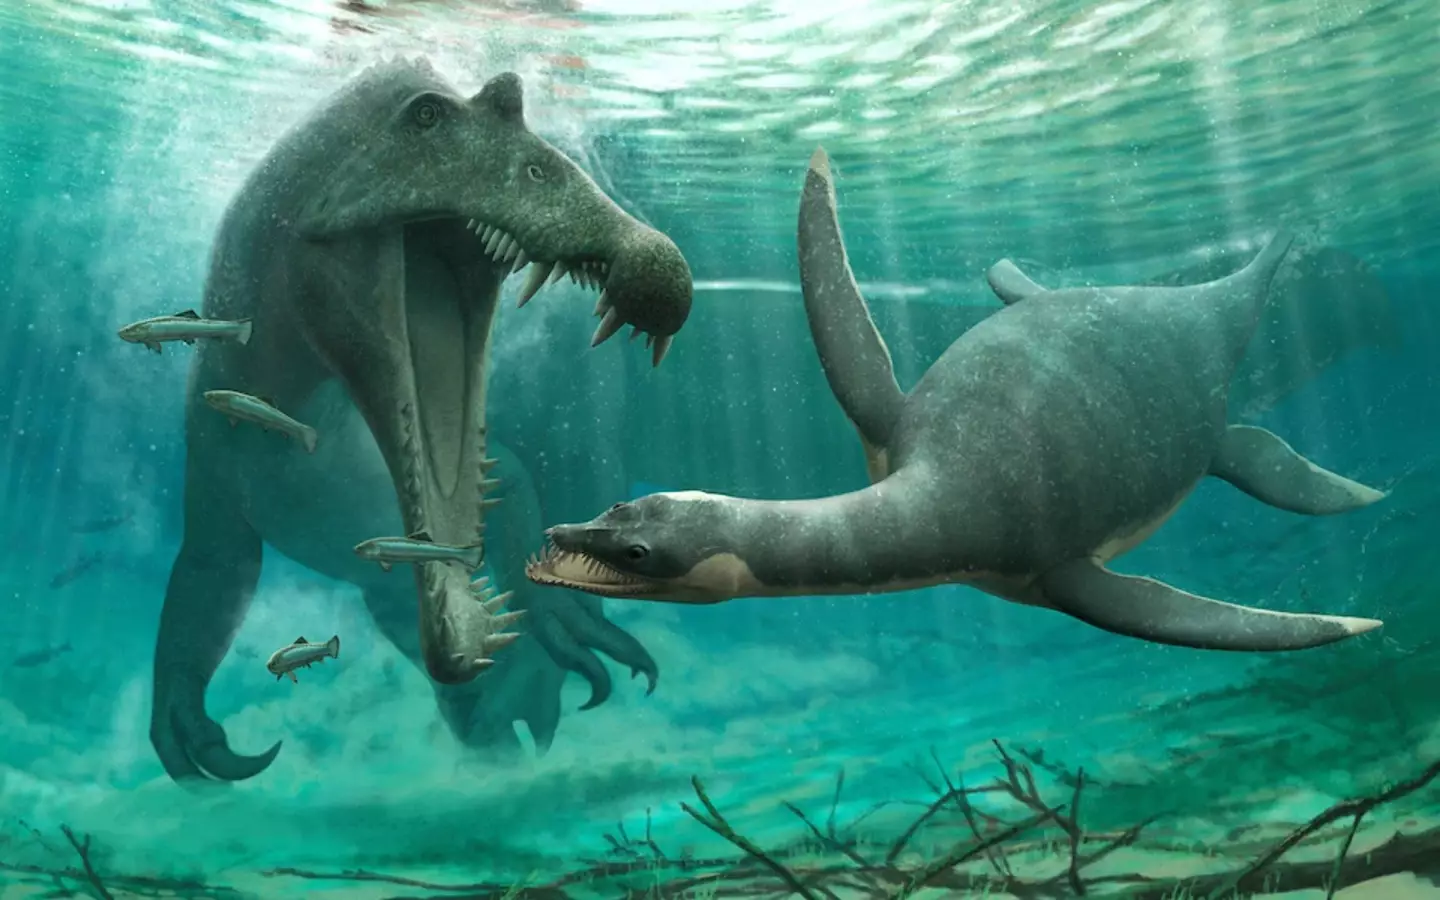 The fossils mean Nessie may have been able to survive in Loch Ness after all.